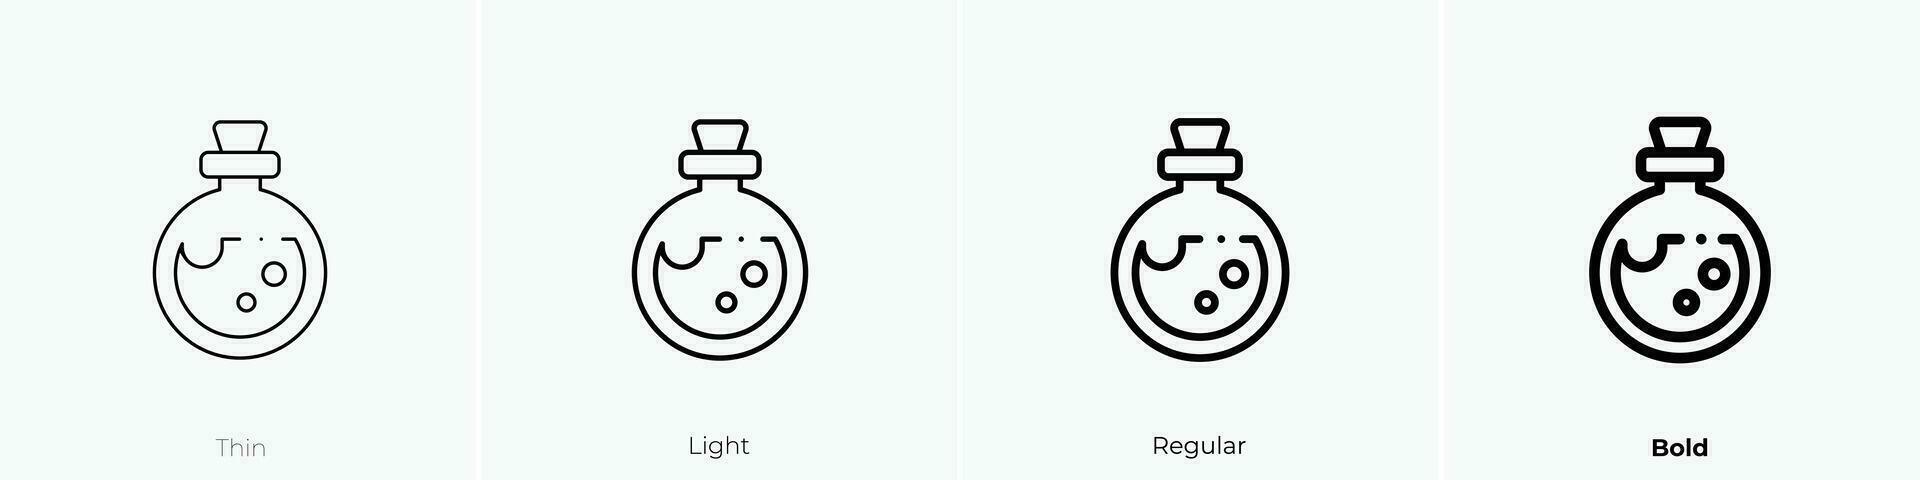 potion icon. Thin, Light, Regular And Bold style design isolated on white background vector